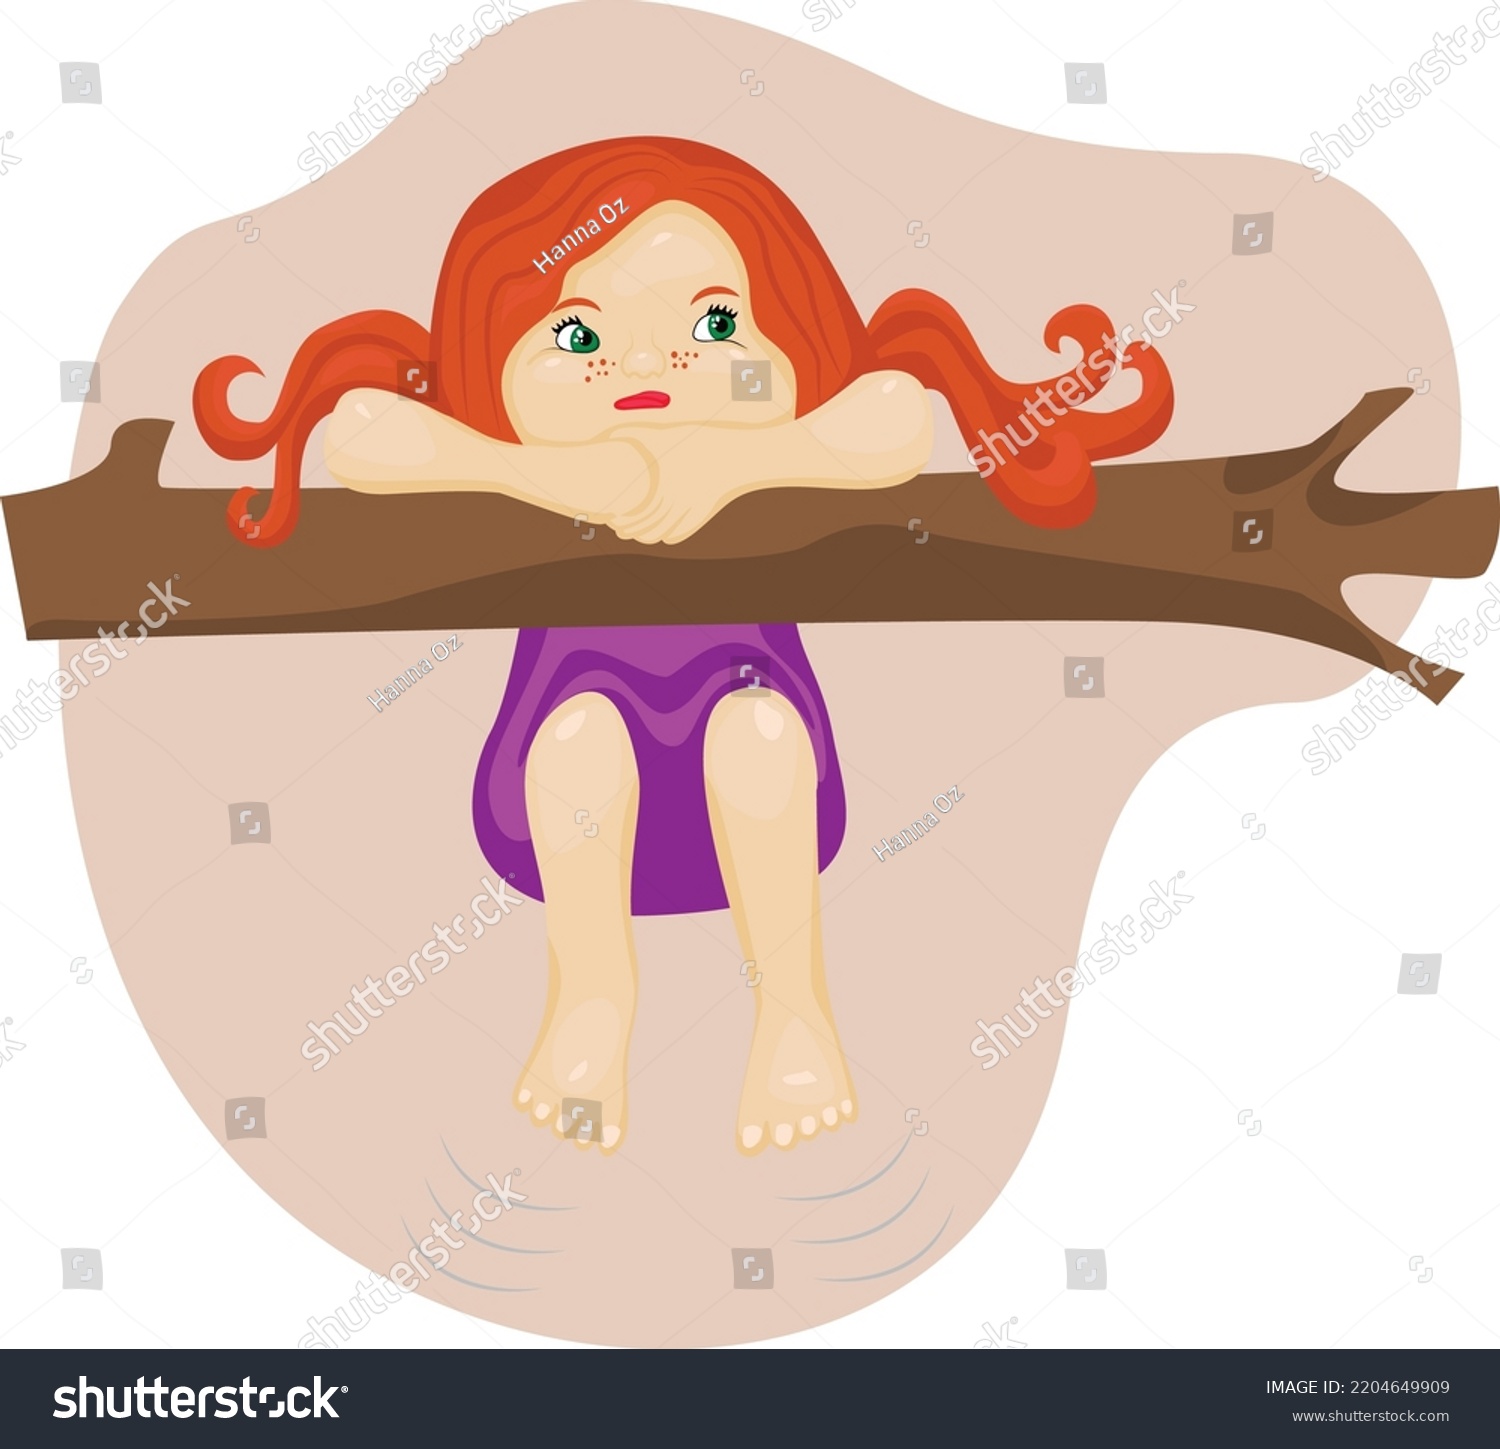 SVG of a girl with red hair tries to climb a tree and dangles her legs. Vector illustration with  details svg